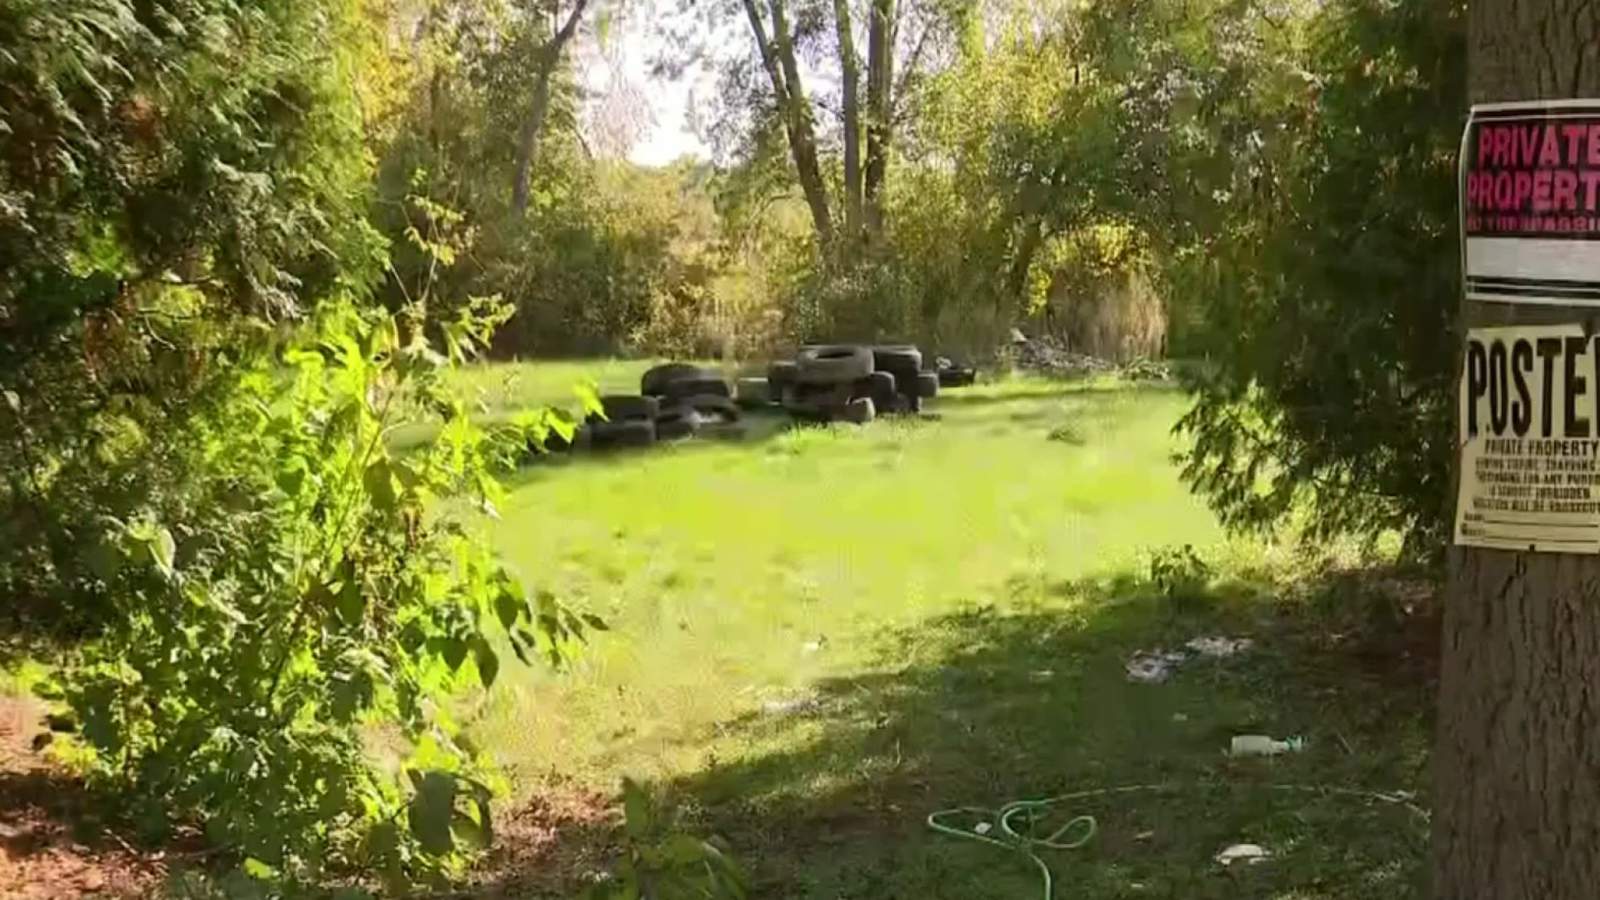 A closer look at alleged ‘training ground’ in Jackson County in Gov. Whitmer kidnapping plot